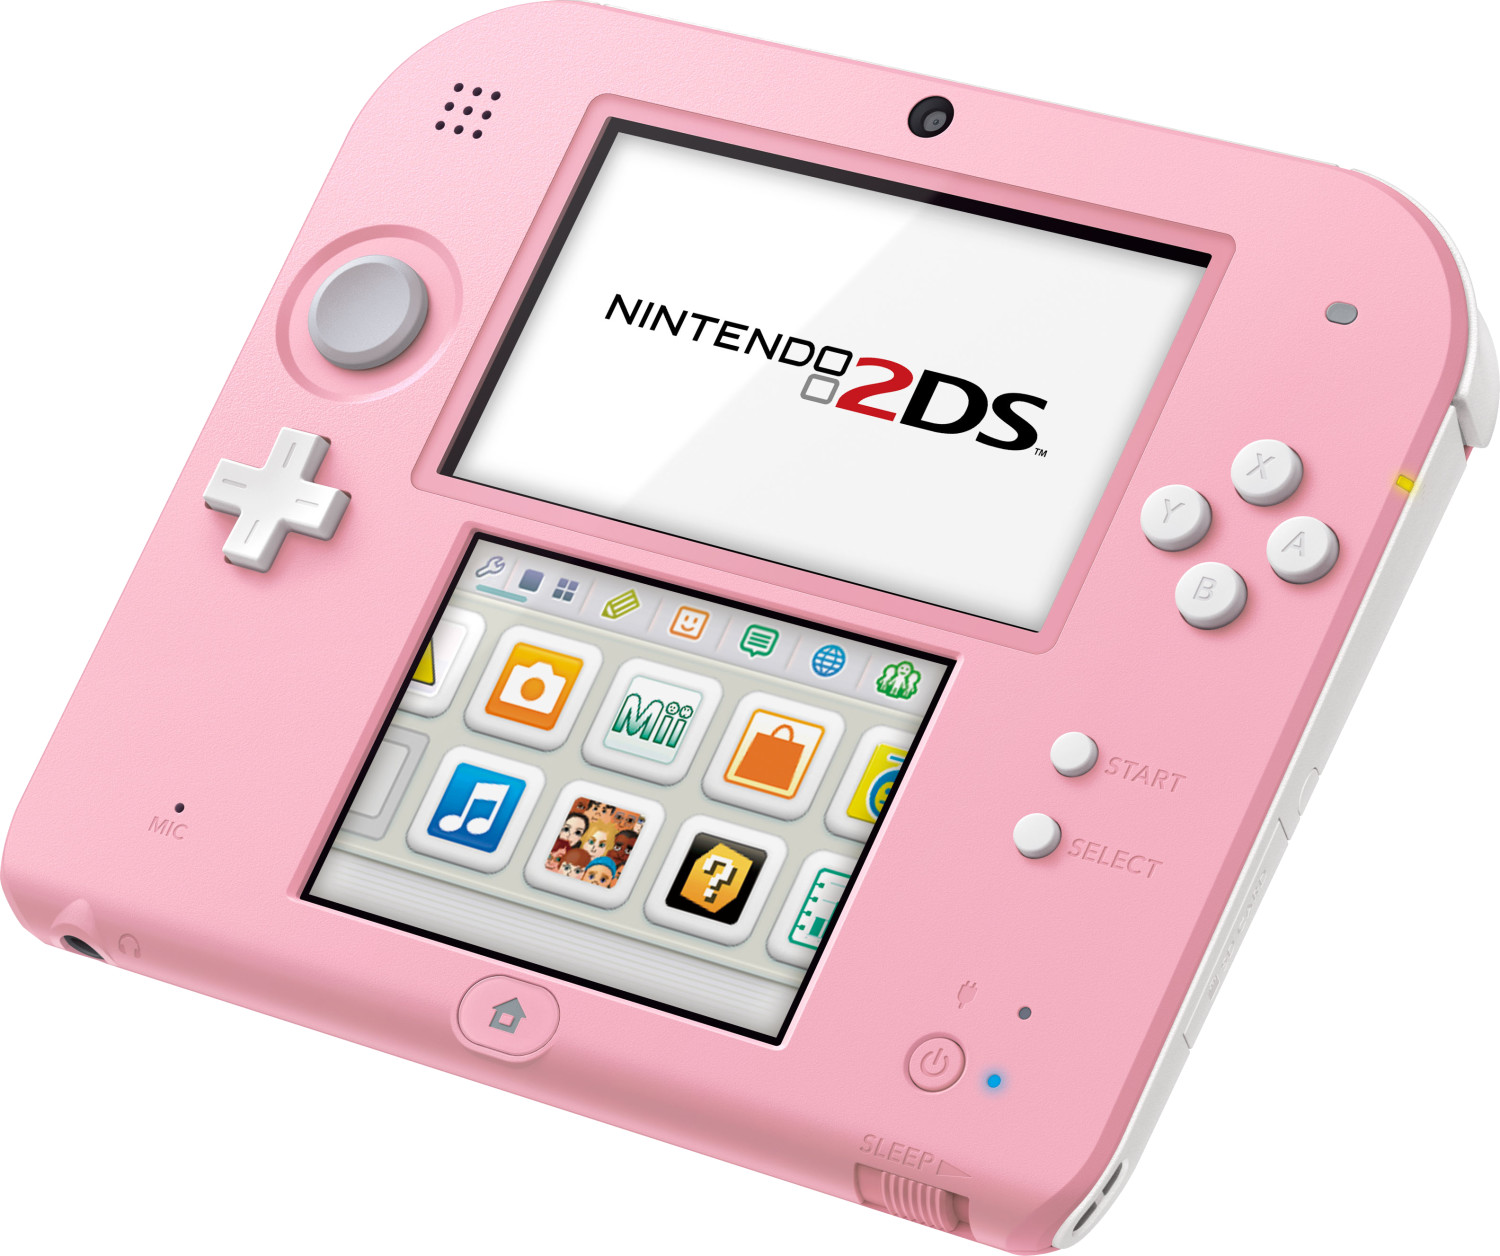 Buy Nintendo 2ds Pink White Tomodachi Life From £329 00 Today Best Deals On Uk